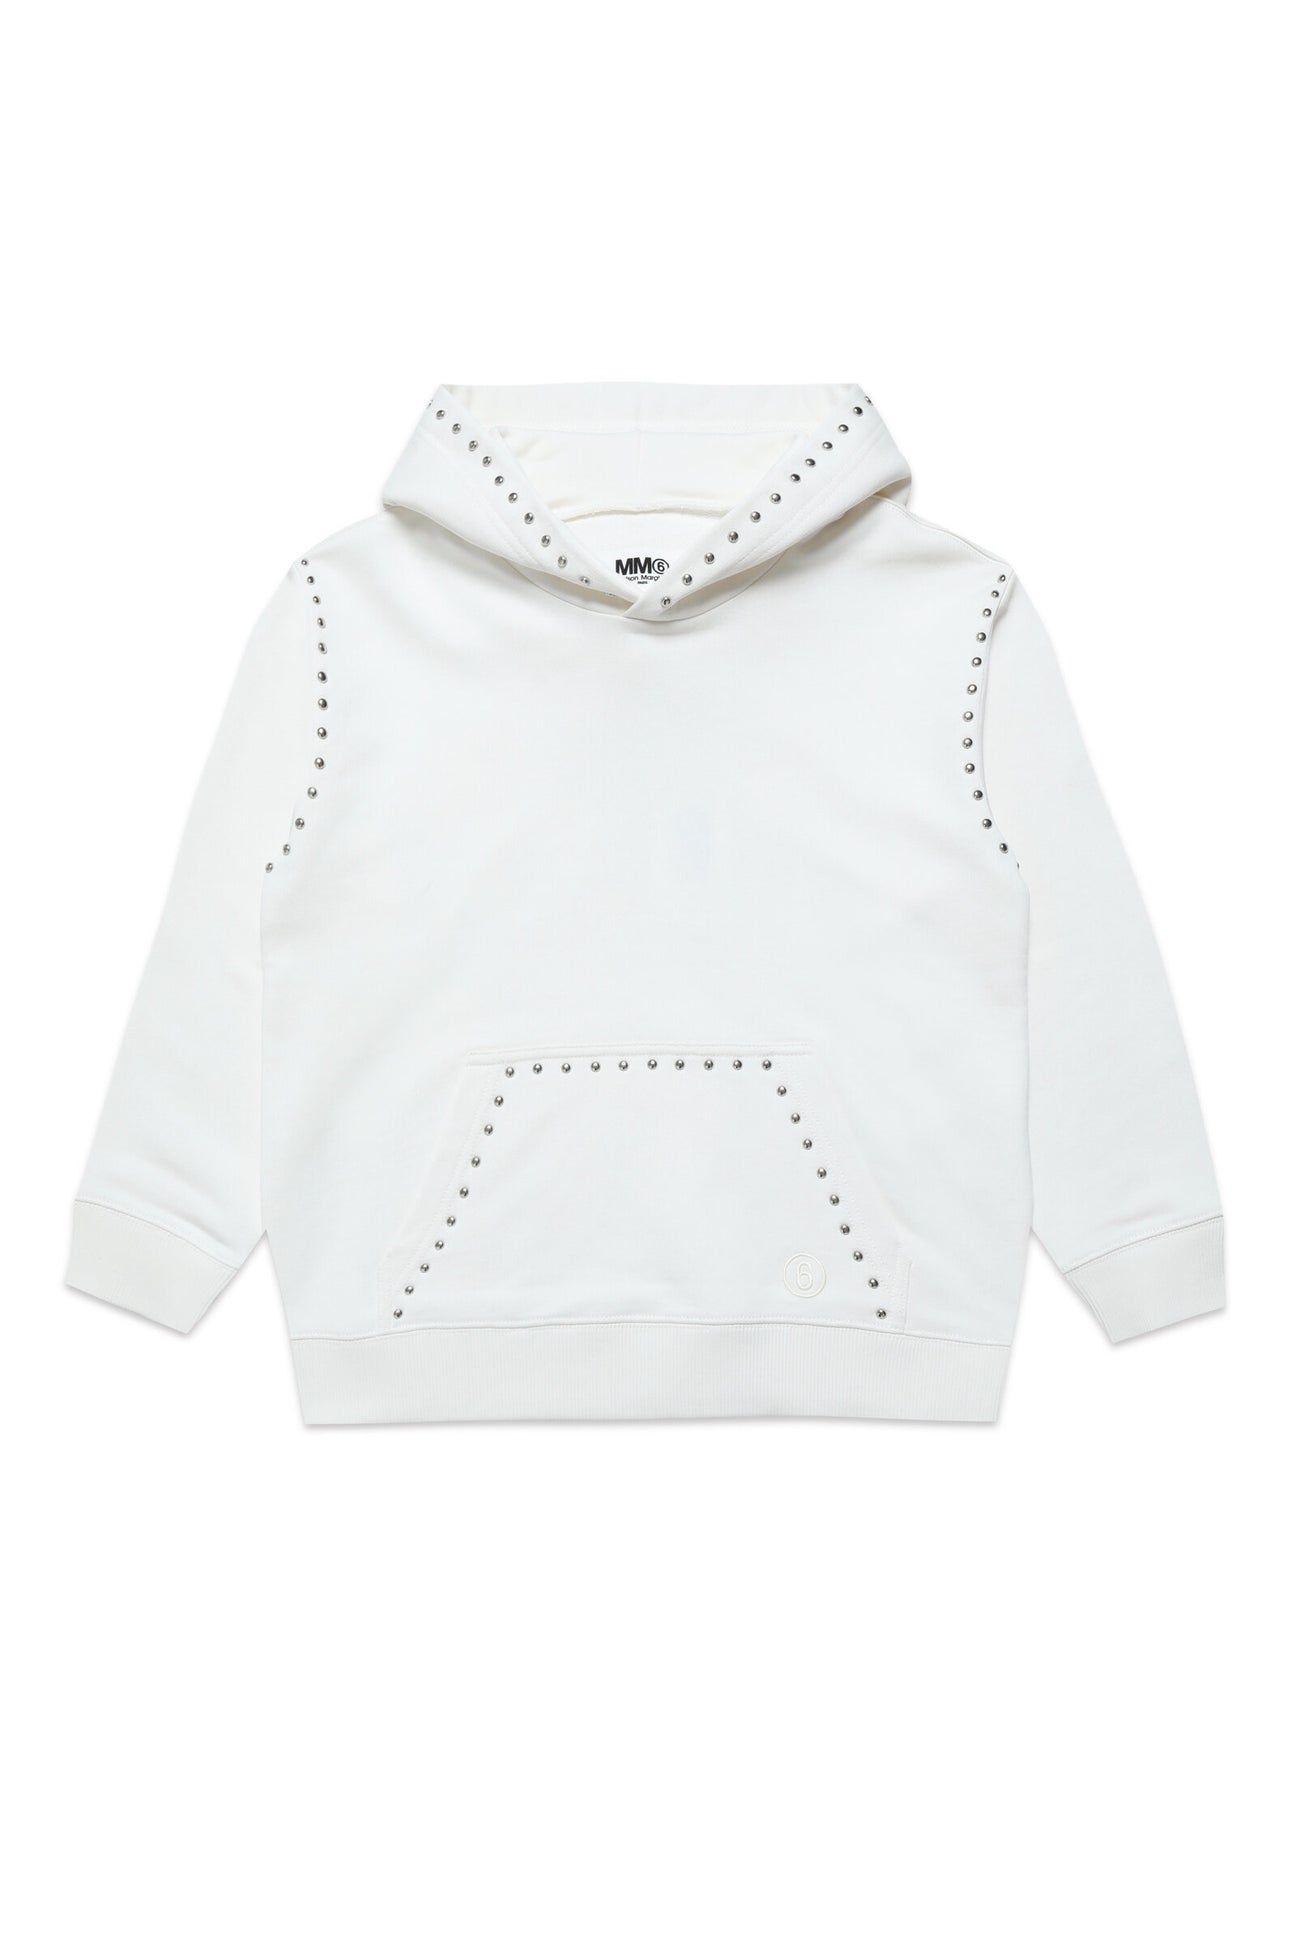 Cotton hooded sweatshirt with studded details Cotton hooded sweatshirt with studded details